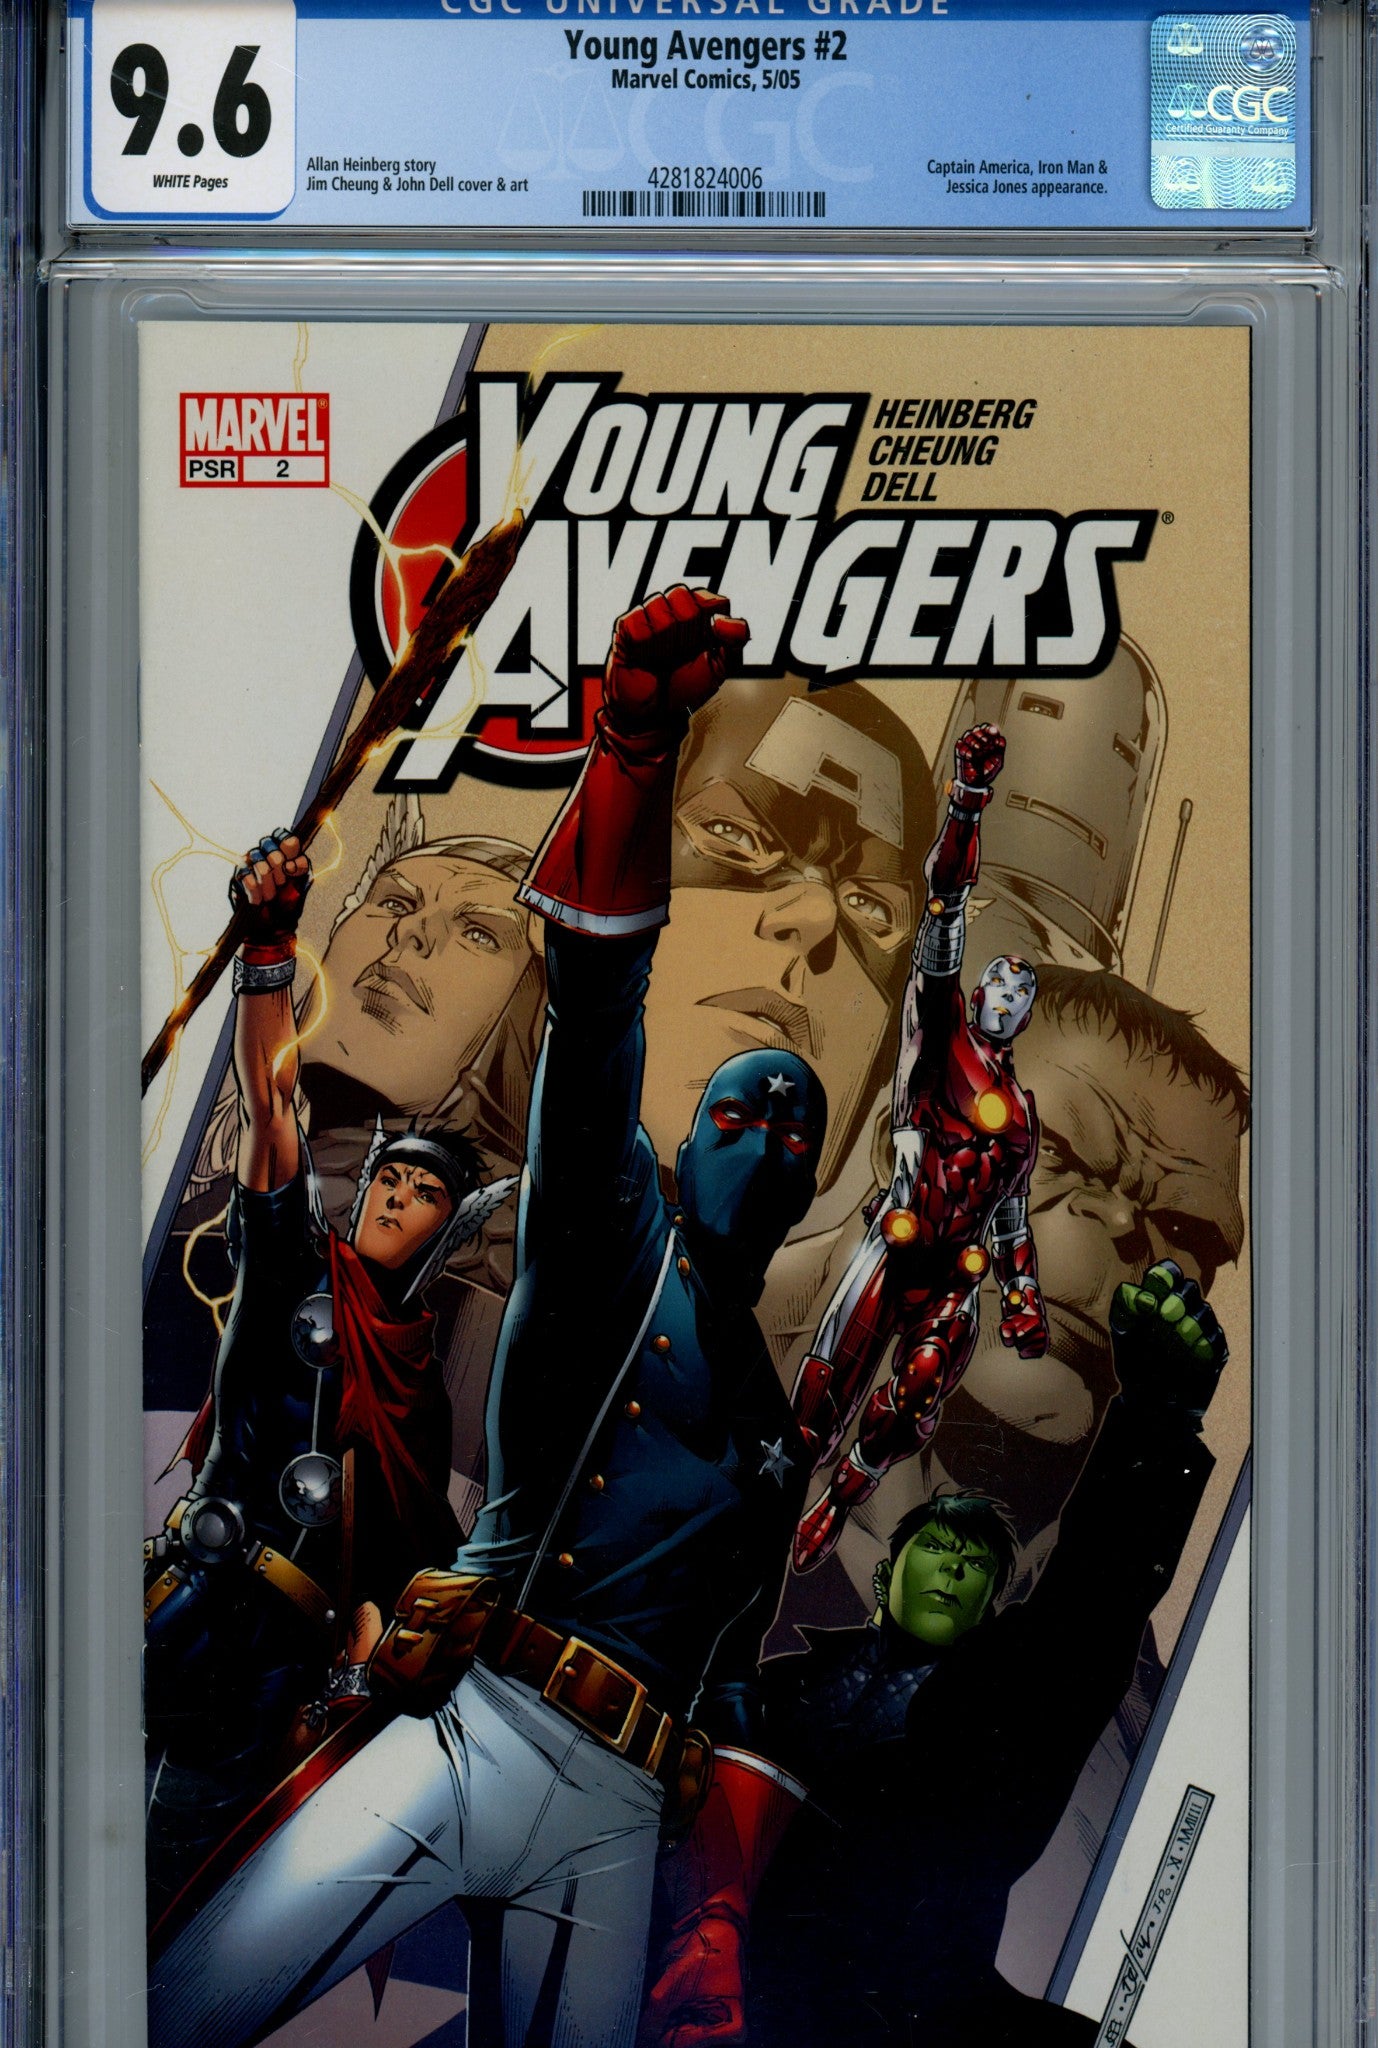 Young Avengers Vol 1 2 CGC 9.6 (2005)